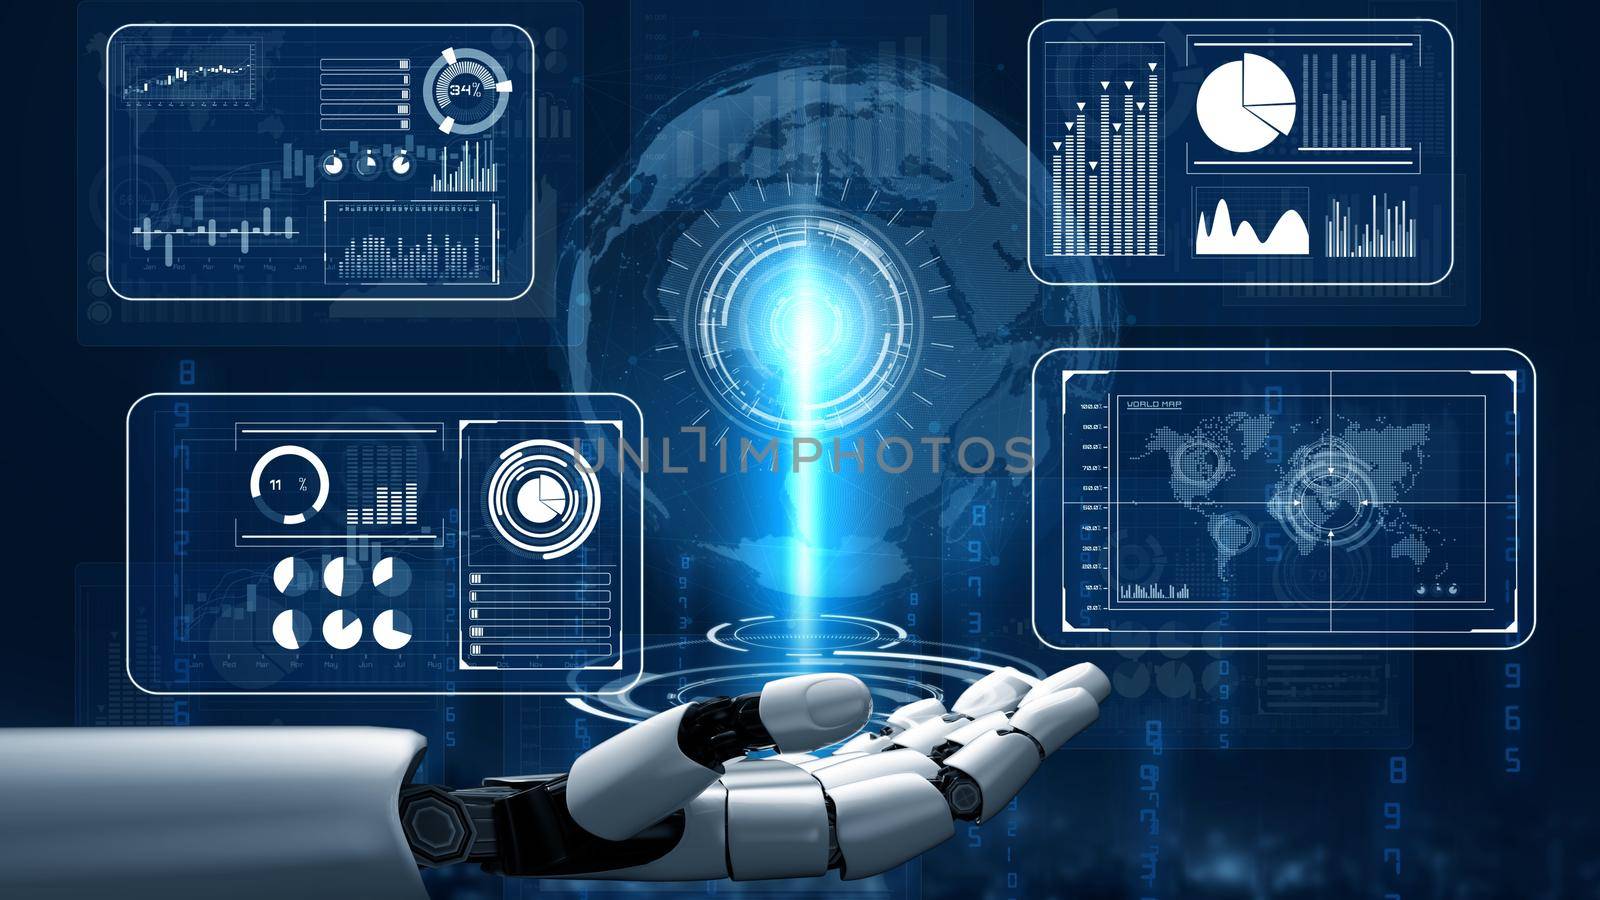 Futuristic robot artificial intelligence revolutionary AI technology concept by biancoblue